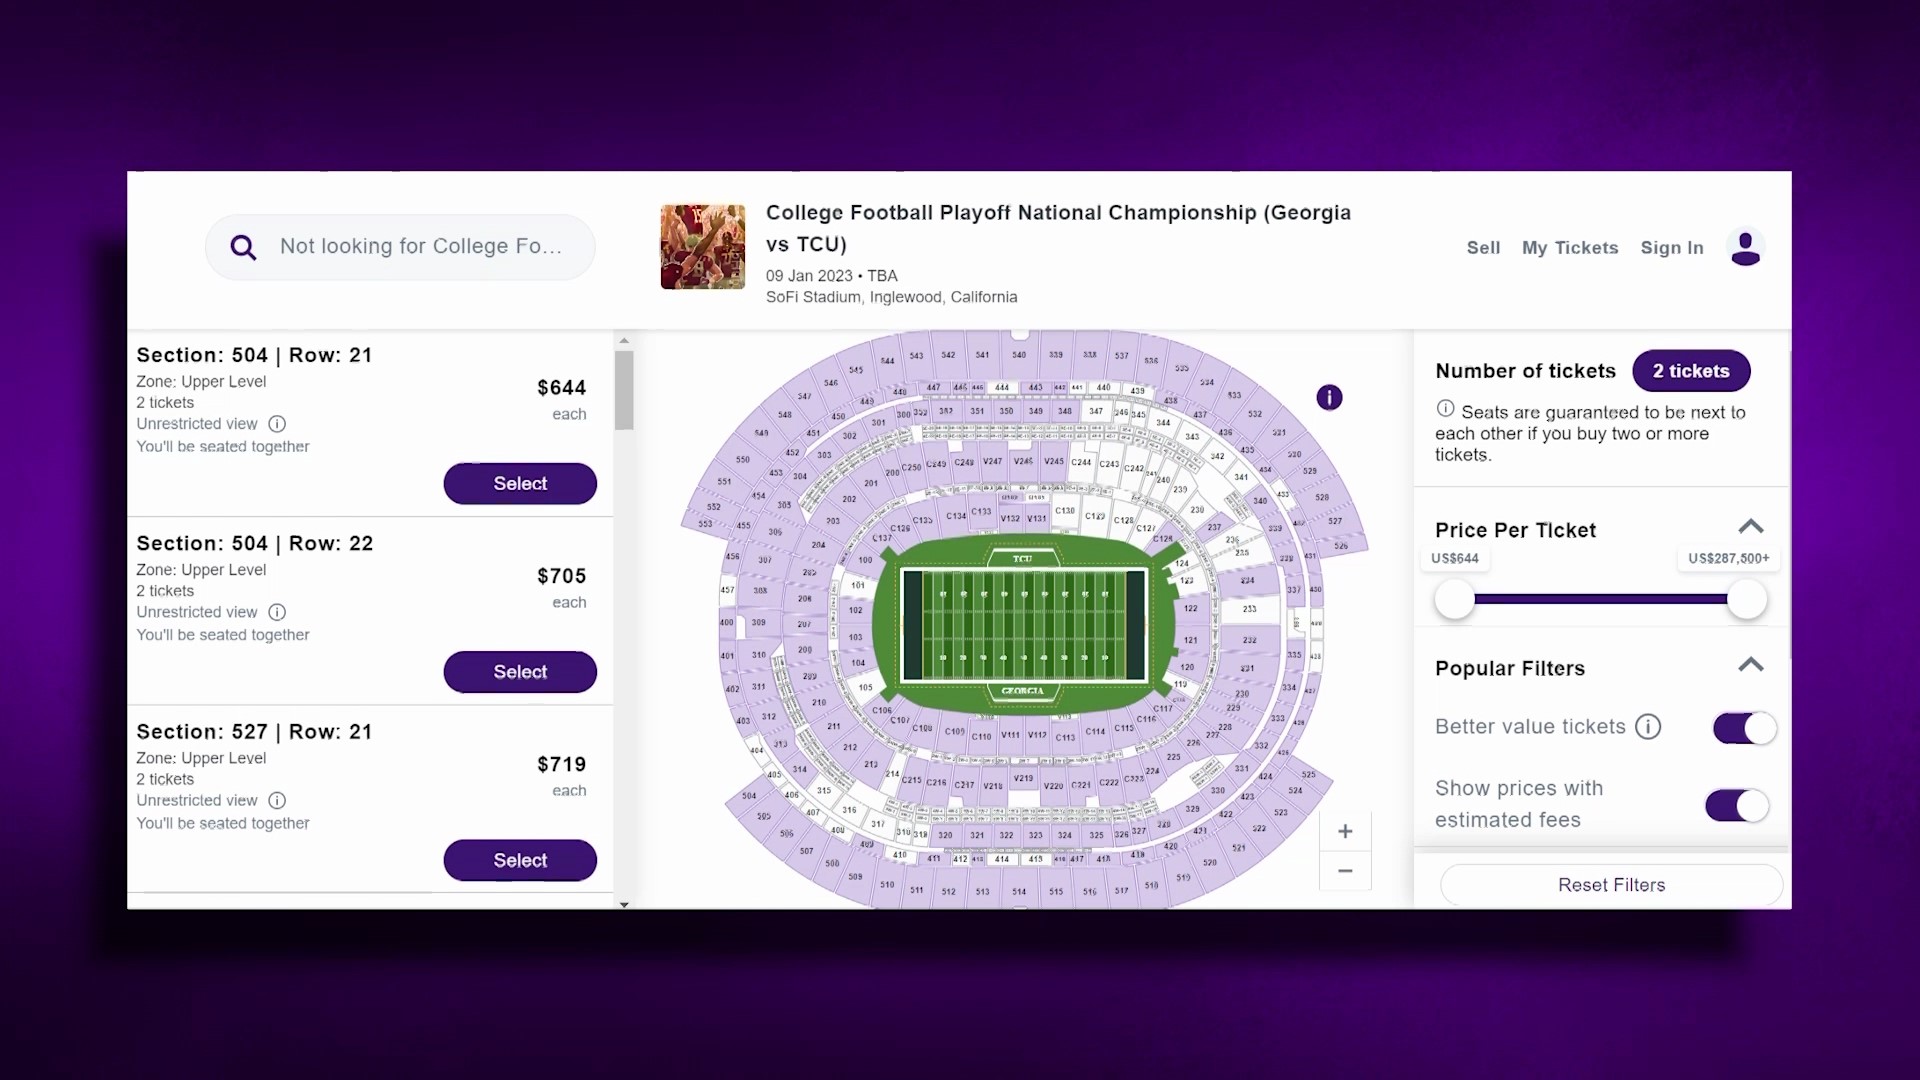 No surprise here: Tickets to the College Football Playoff National Championship between No. 3 TCU and No. 1 Georgia are looking mighty expensive.